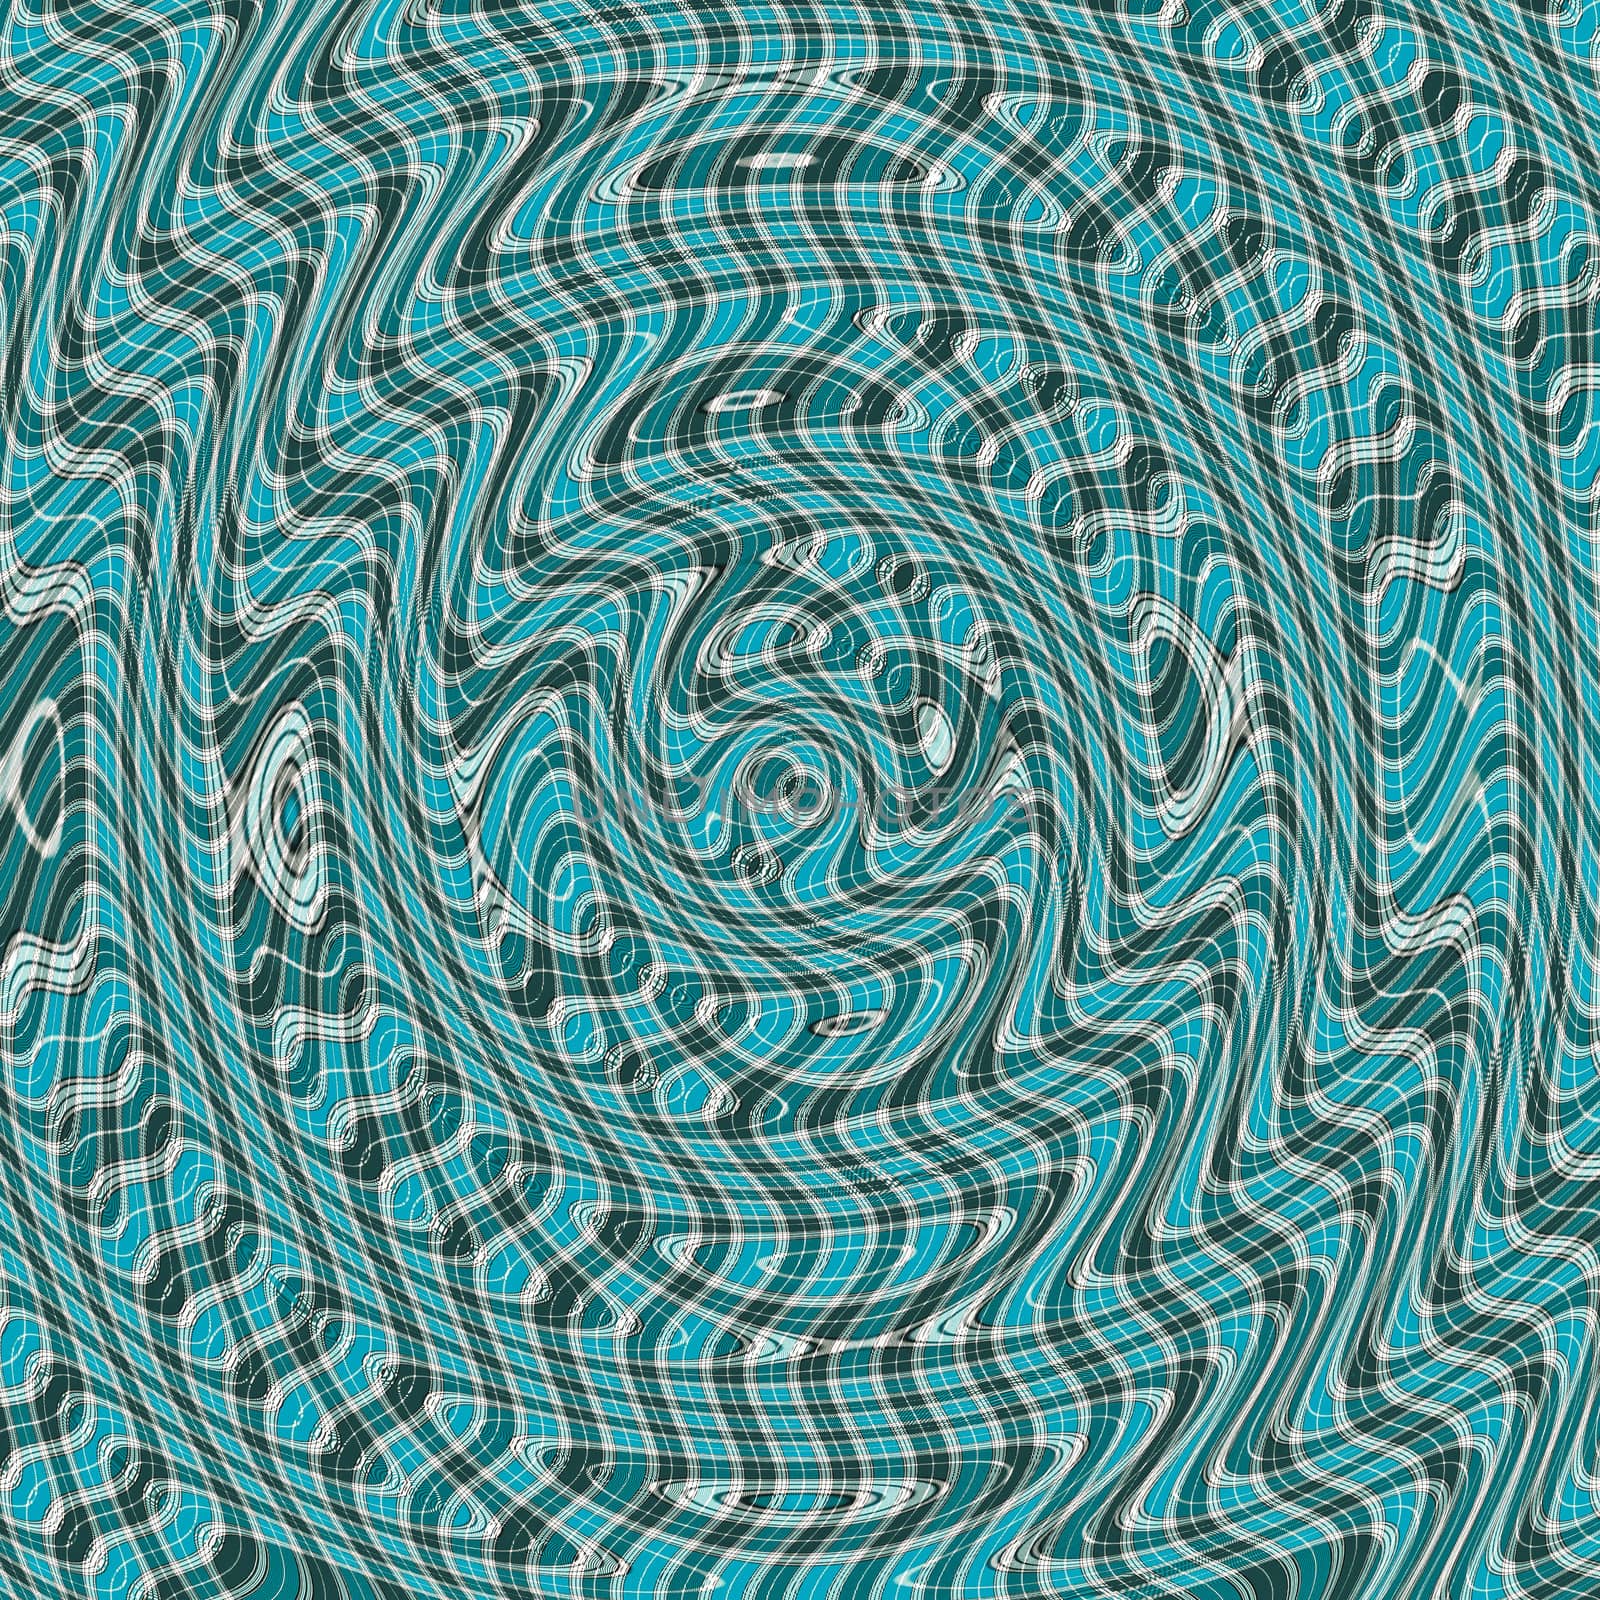 Warped illustration of colorful tartan fabric as a background image